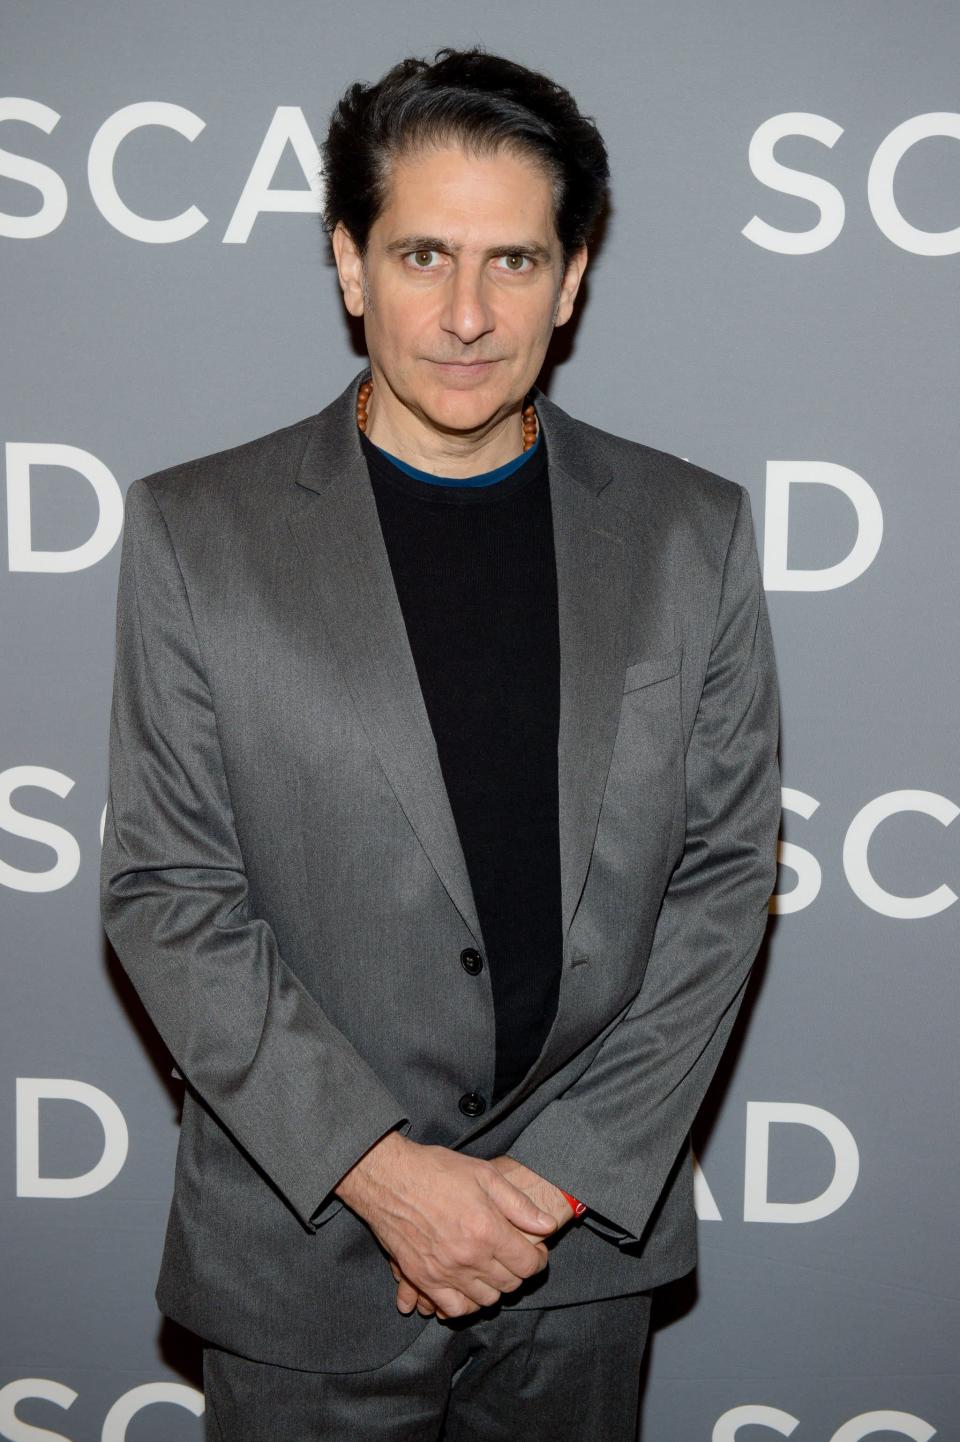 <p>Imperioli is set to star as Dominic Di Grasso, a man on holiday with his elderly father and his son who just graduated from college. Previously, he starred in "The Sopranos," "One Night in Miami," "Goodfellas," and "The Many Saints of Newark."</p>